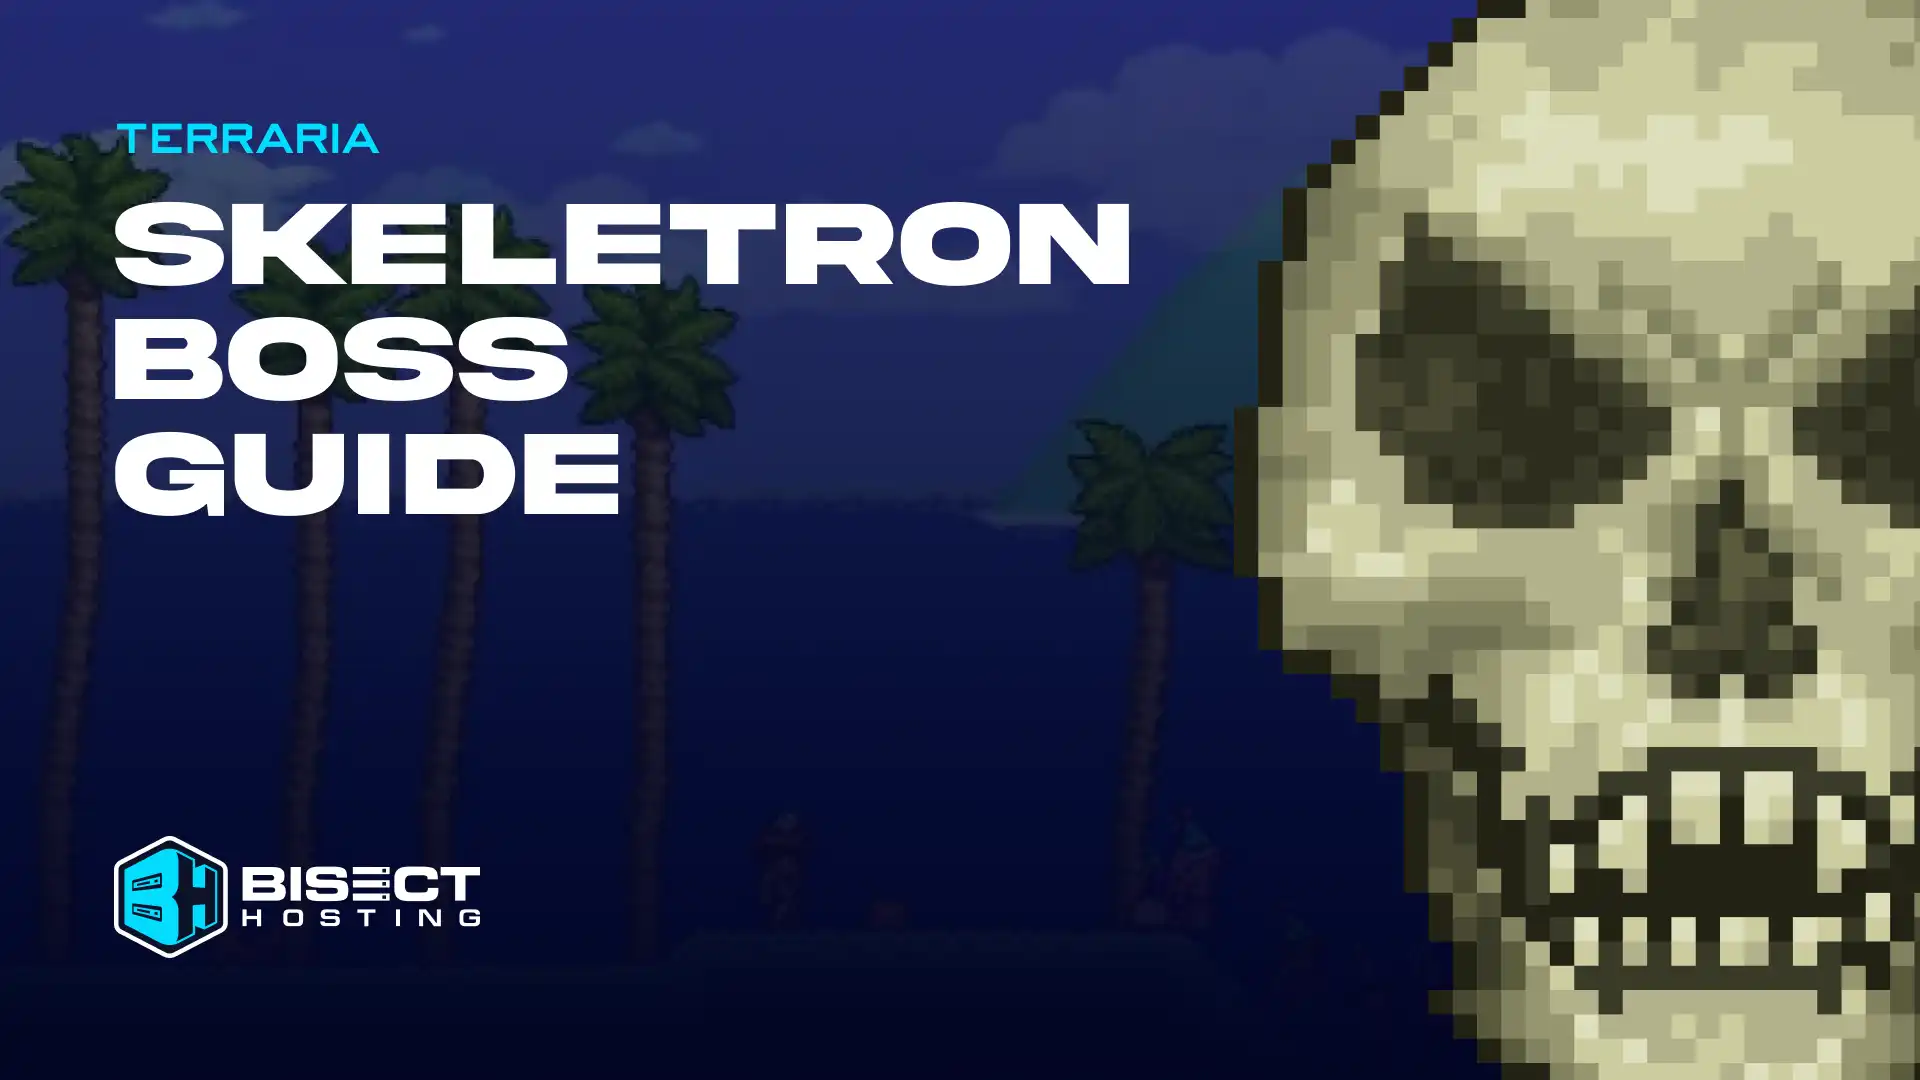 Terraria Skeletron Boss Guide: How to Summon, Fight Tips, & Loot Table